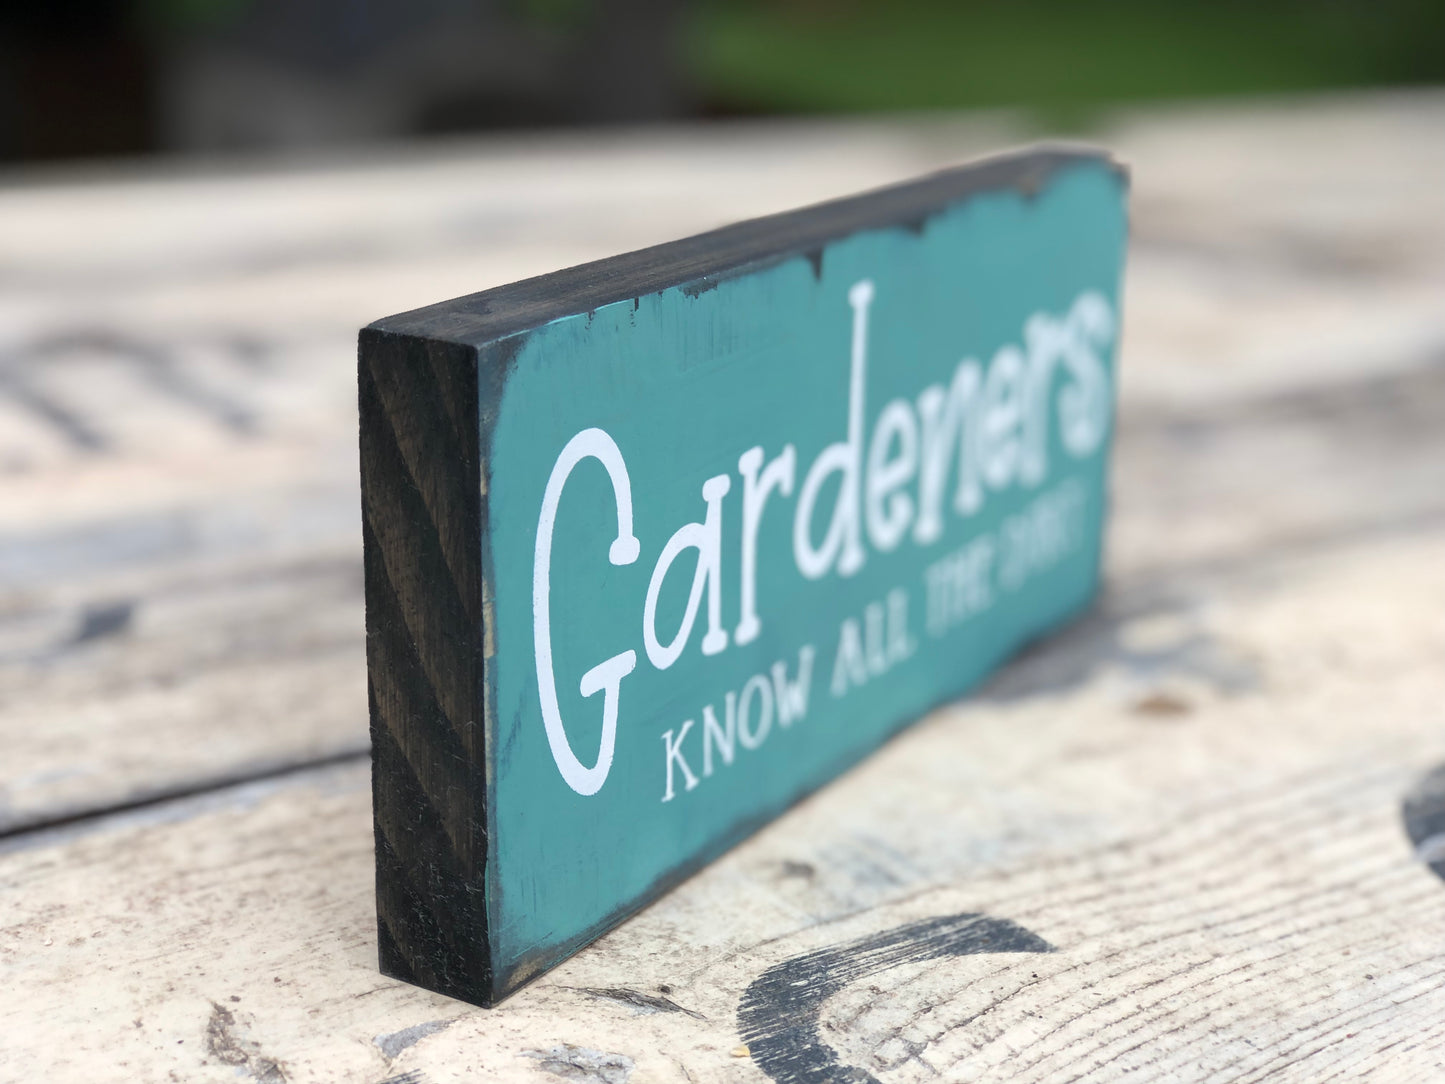 GARDENERS KNOW ALL THE DIRT -WOOD SIGN